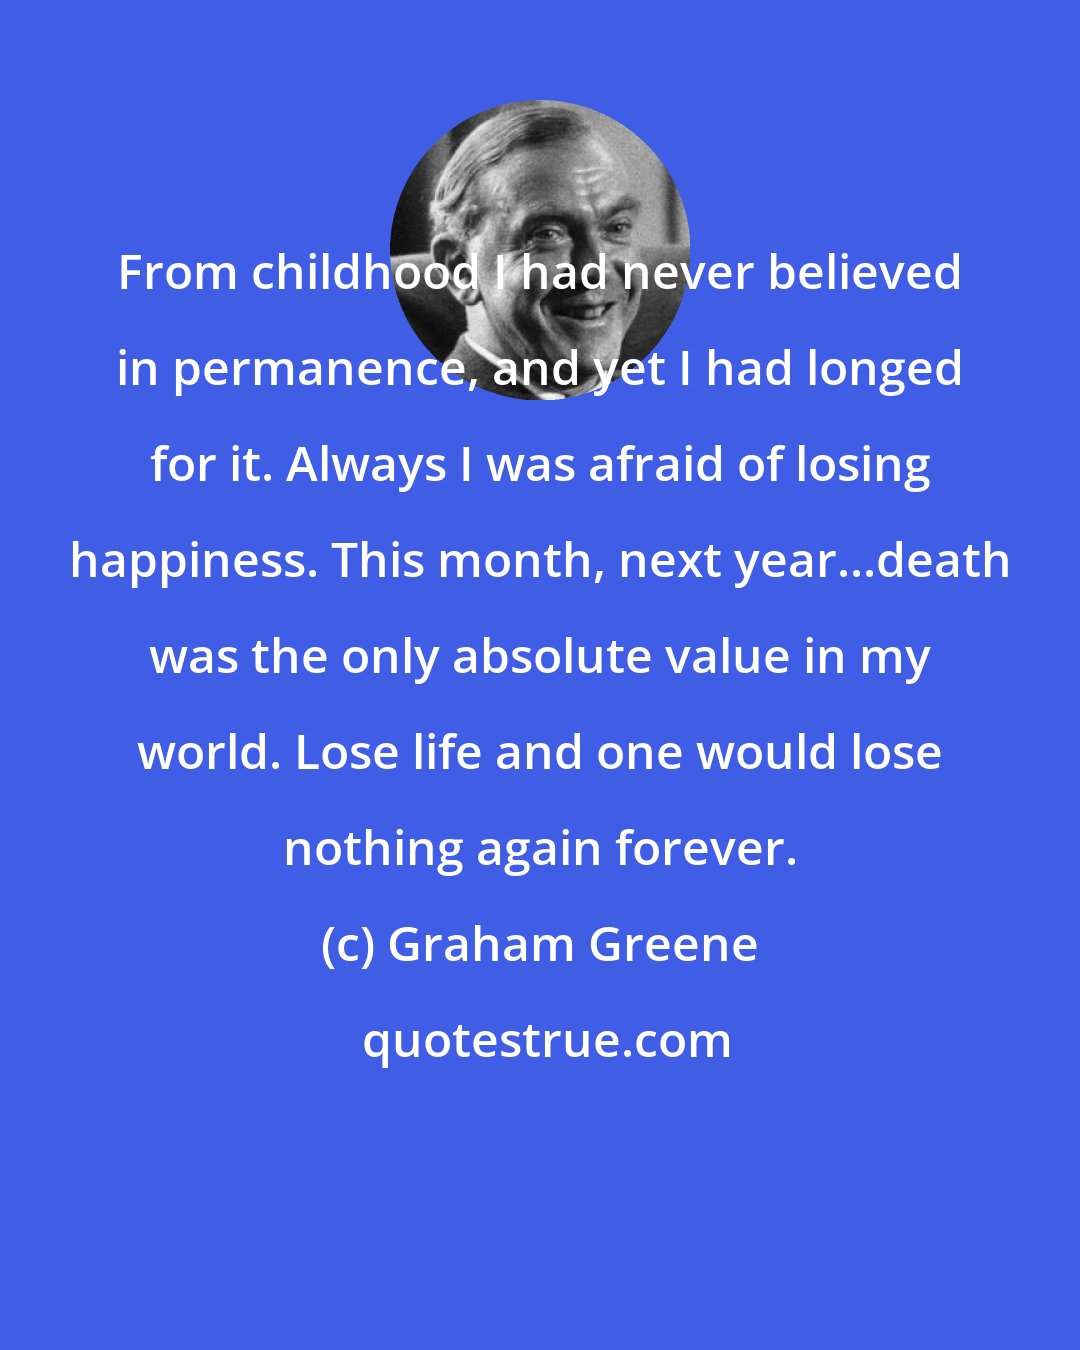 Graham Greene: From childhood I had never believed in permanence, and yet I had longed for it. Always I was afraid of losing happiness. This month, next year...death was the only absolute value in my world. Lose life and one would lose nothing again forever.